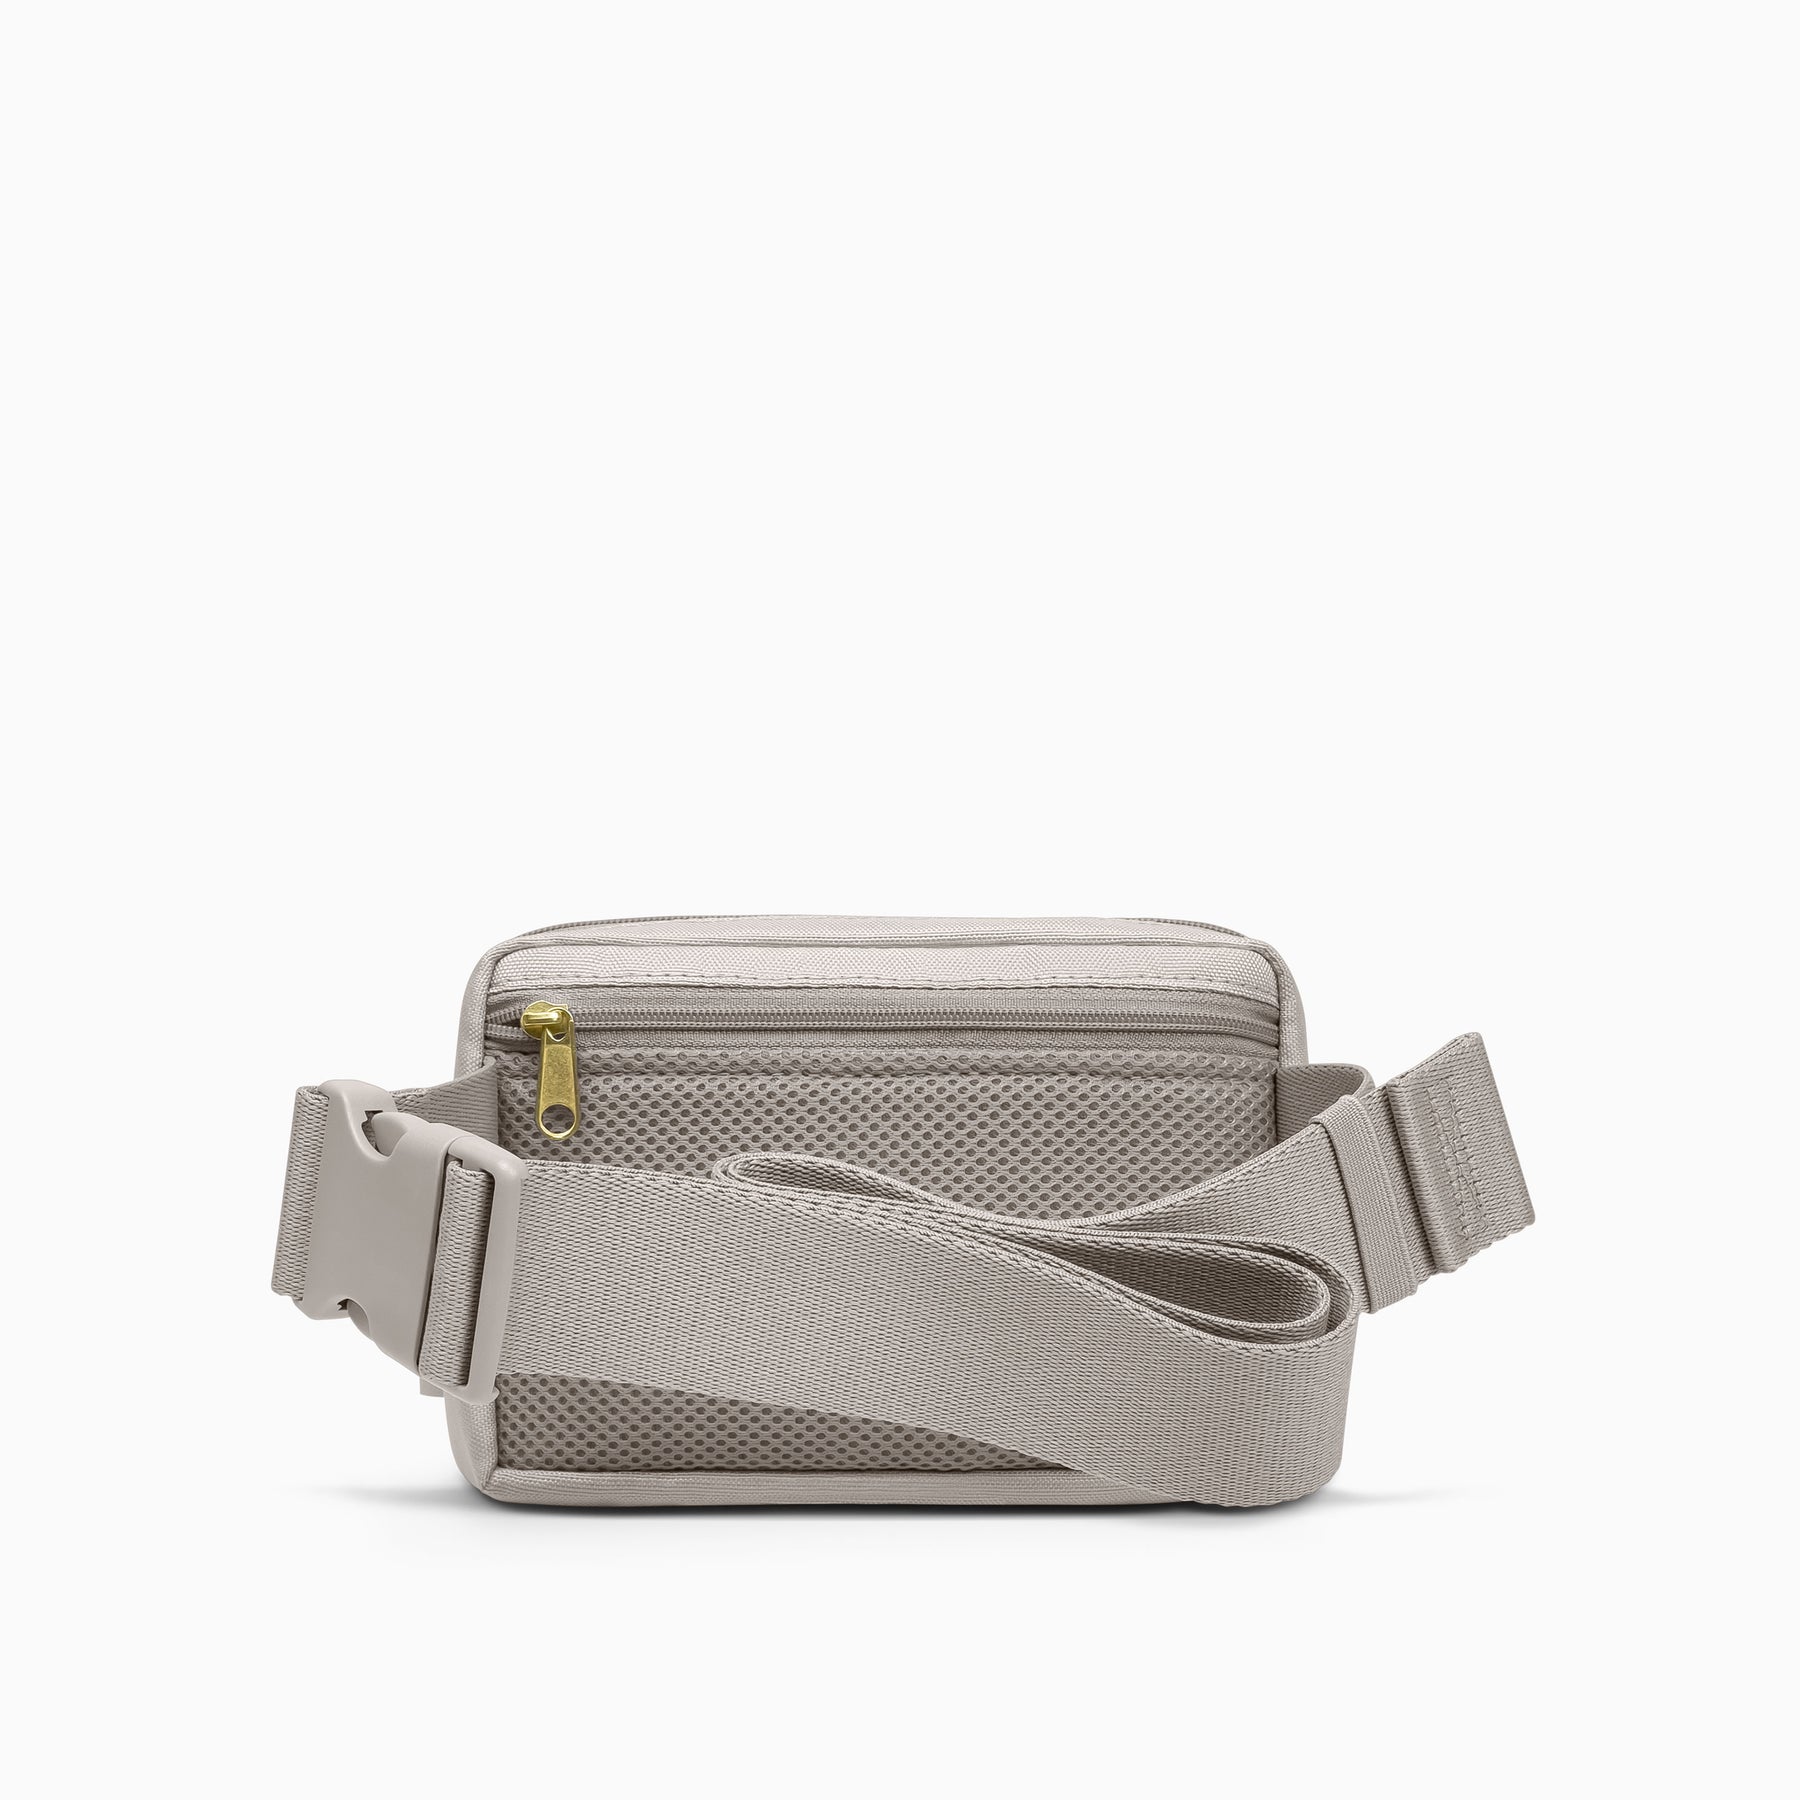 Canvelle Fanny Pack Sling - Grey - Machine Washable - Formerly Logan + Lenora